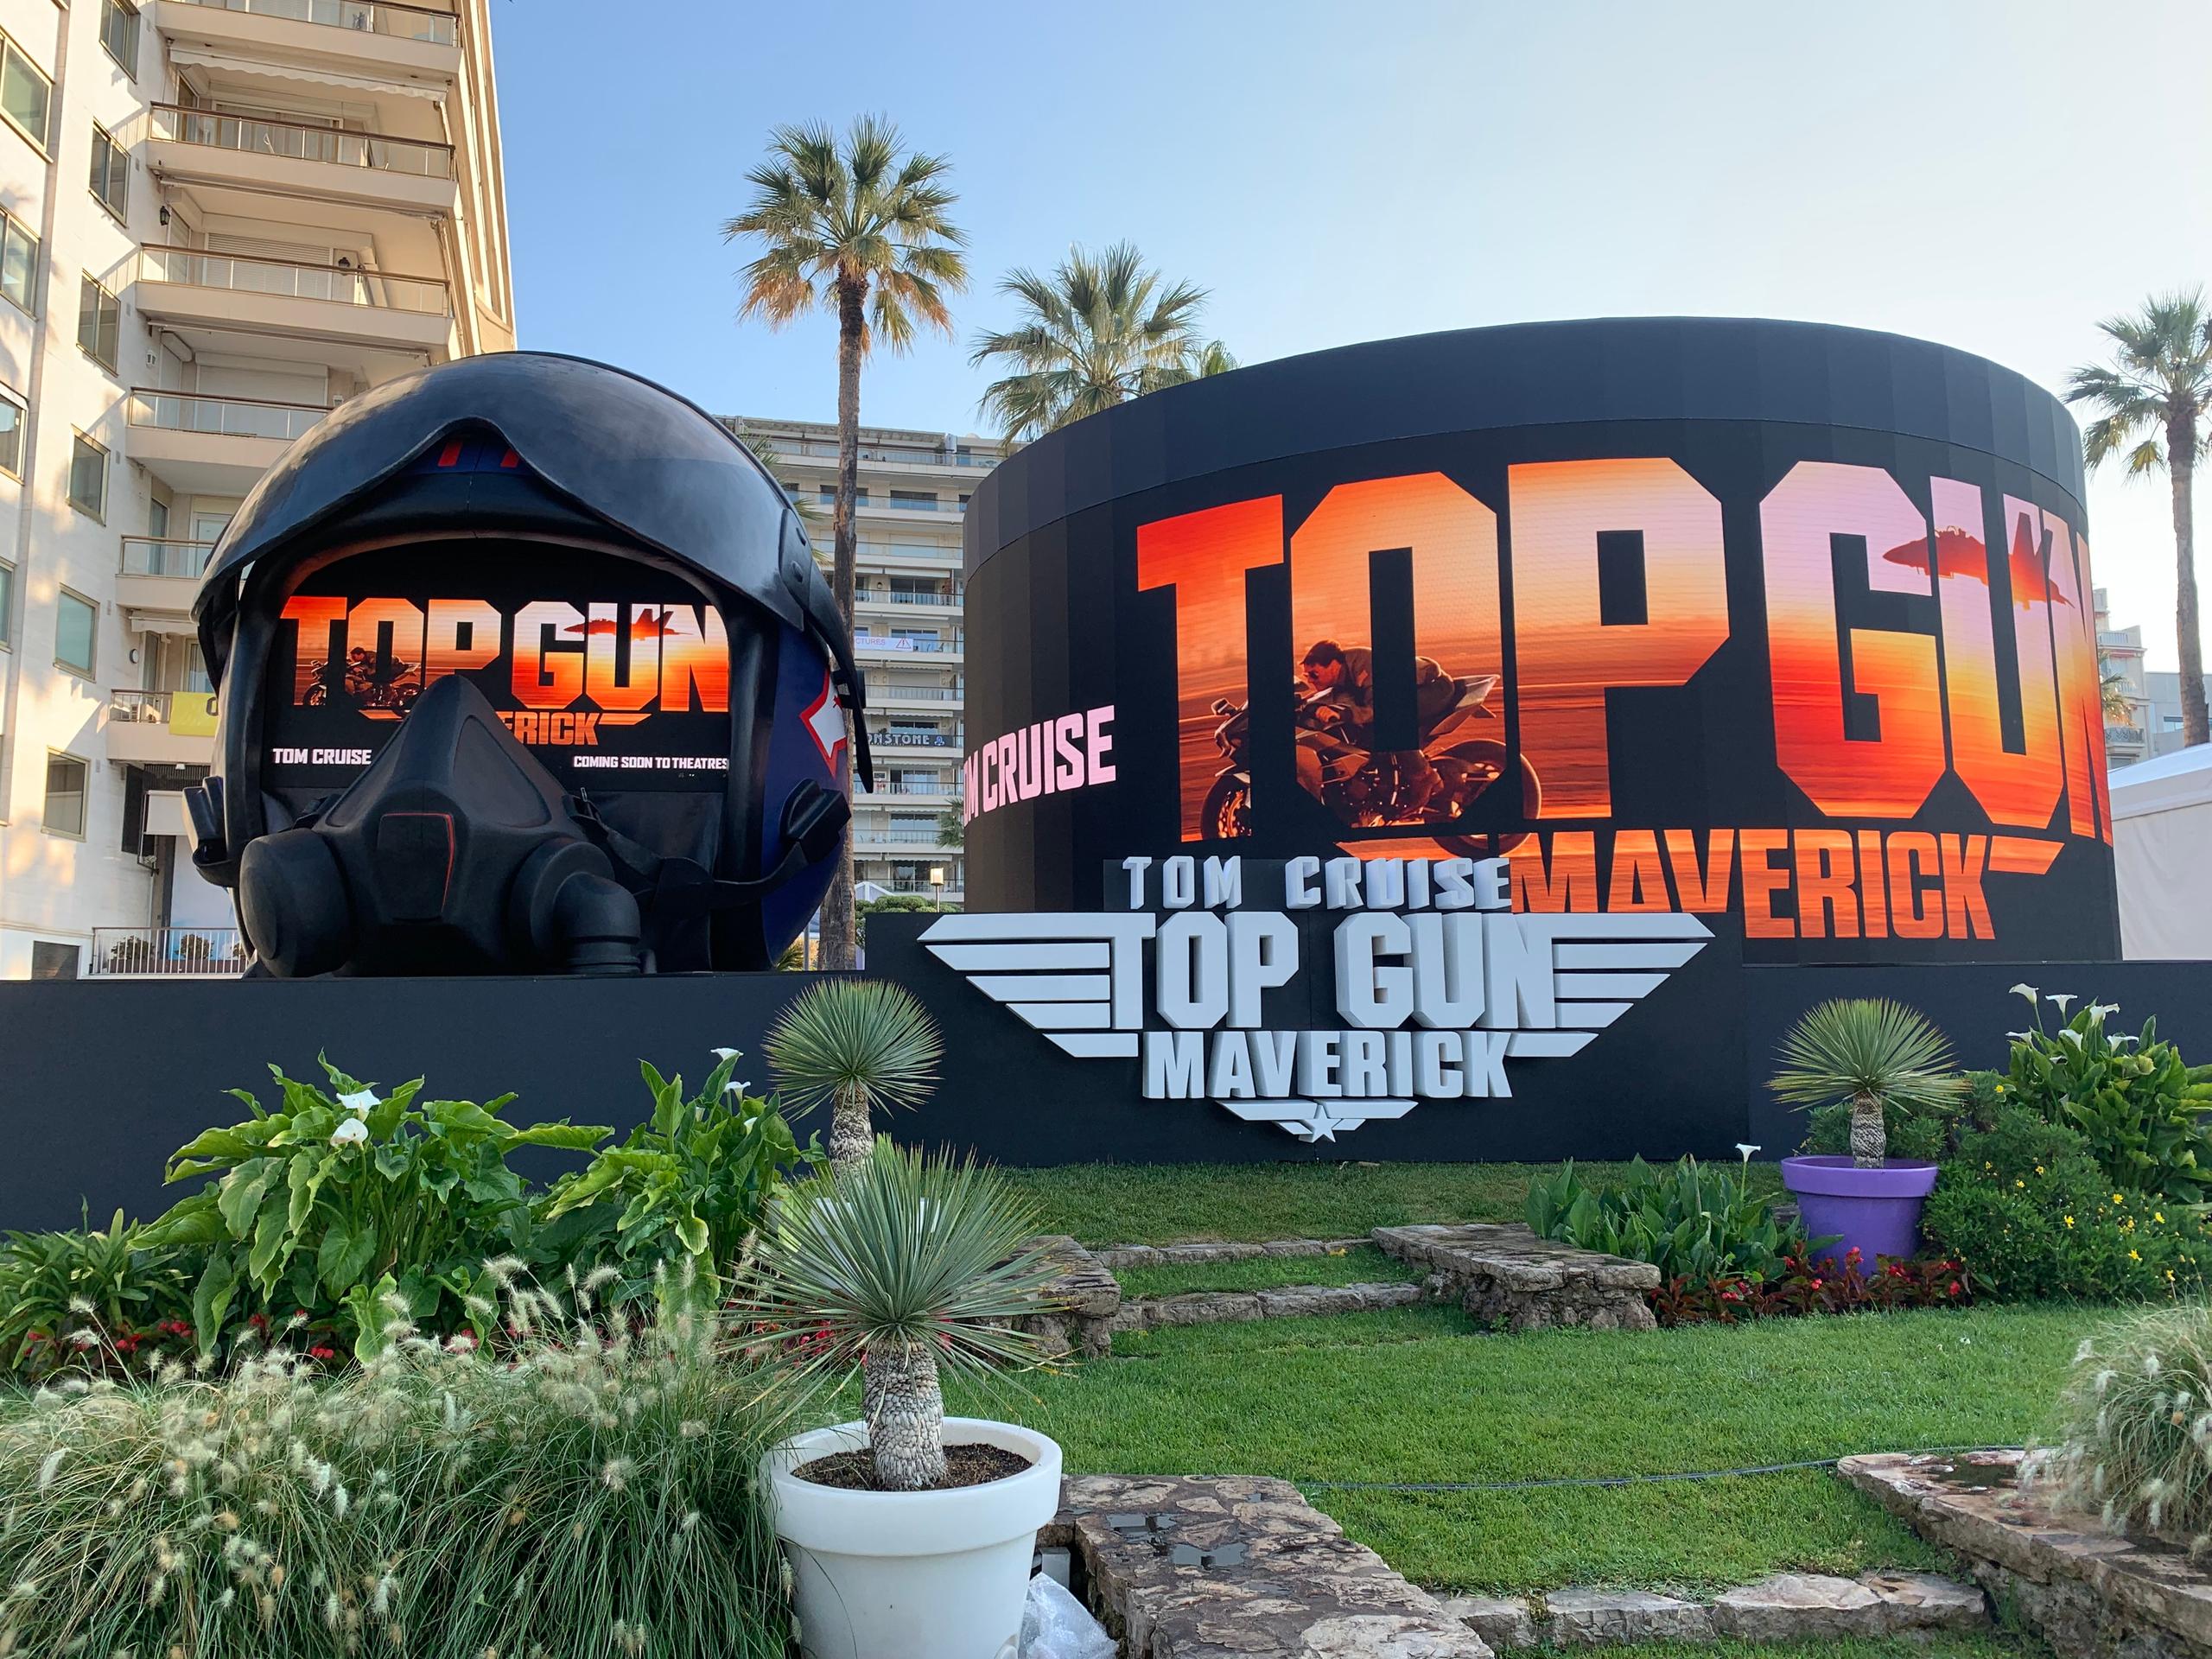 Promotional stand of Top Gun: Maverick, in Cannes